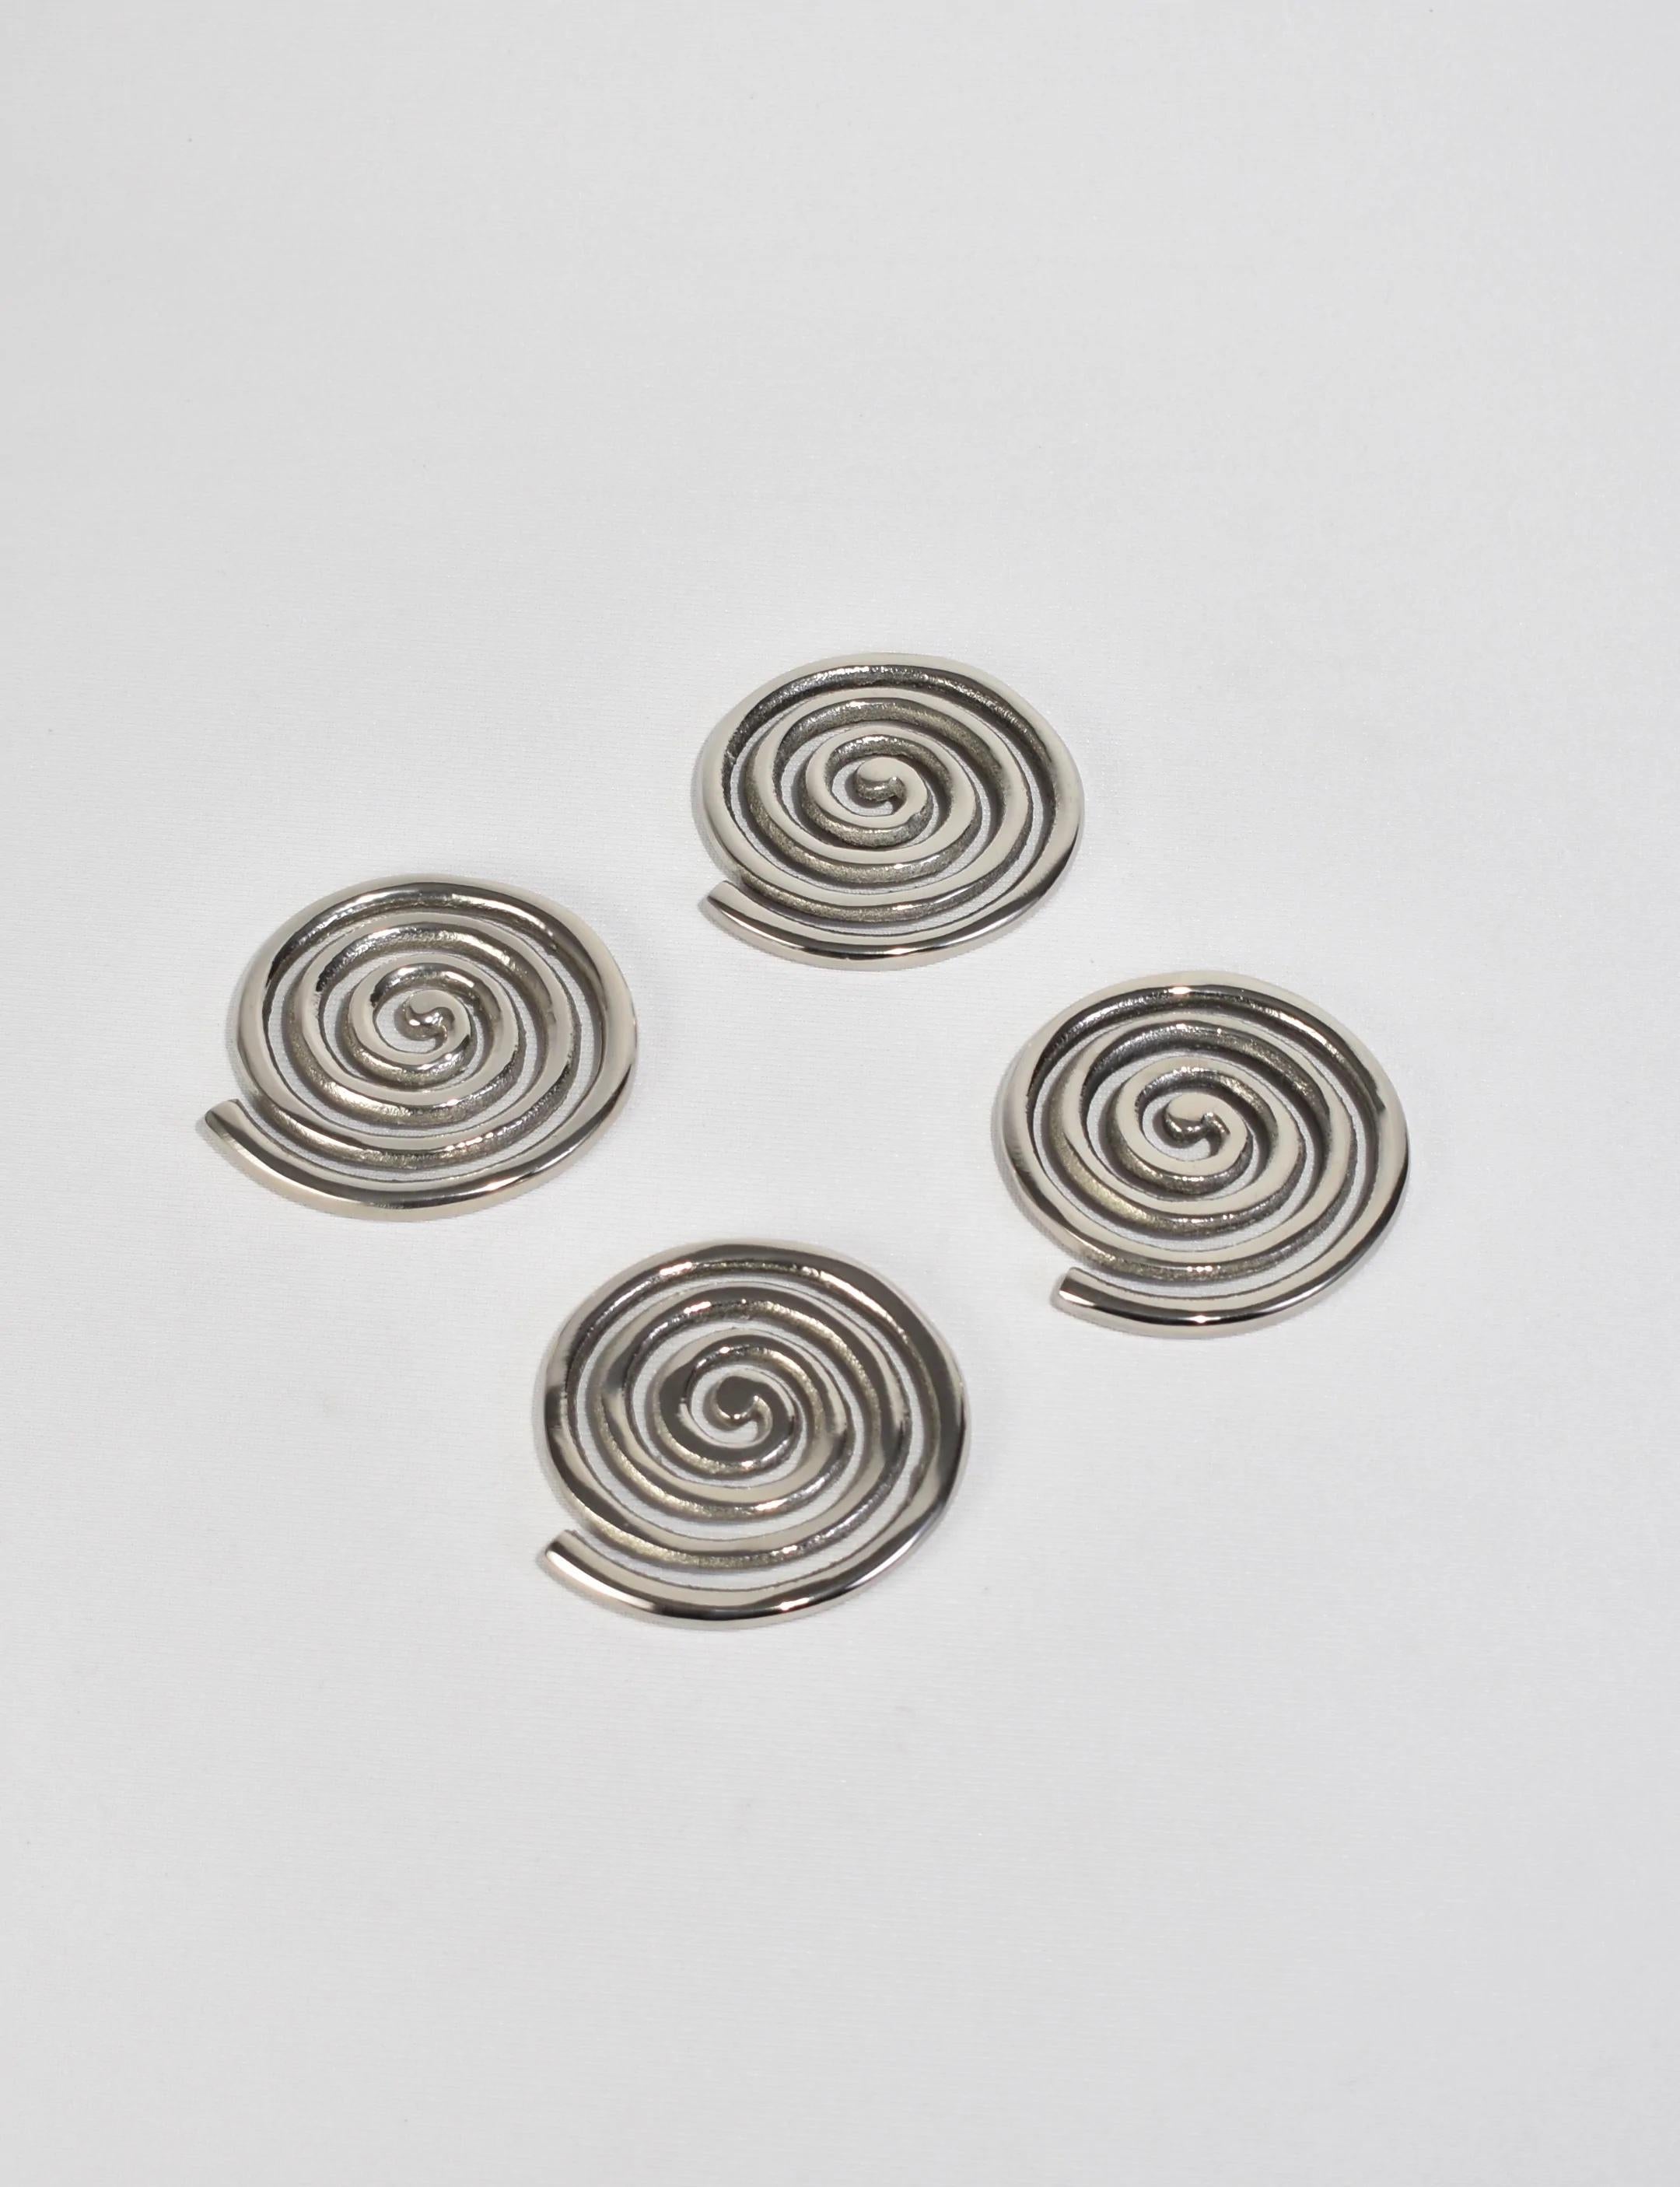 A set of four sand-cast aluminum spiral coasters plated in nickel. These coasters will add joyful personality to your table-scape while protecting whatever surface lies beneath.

